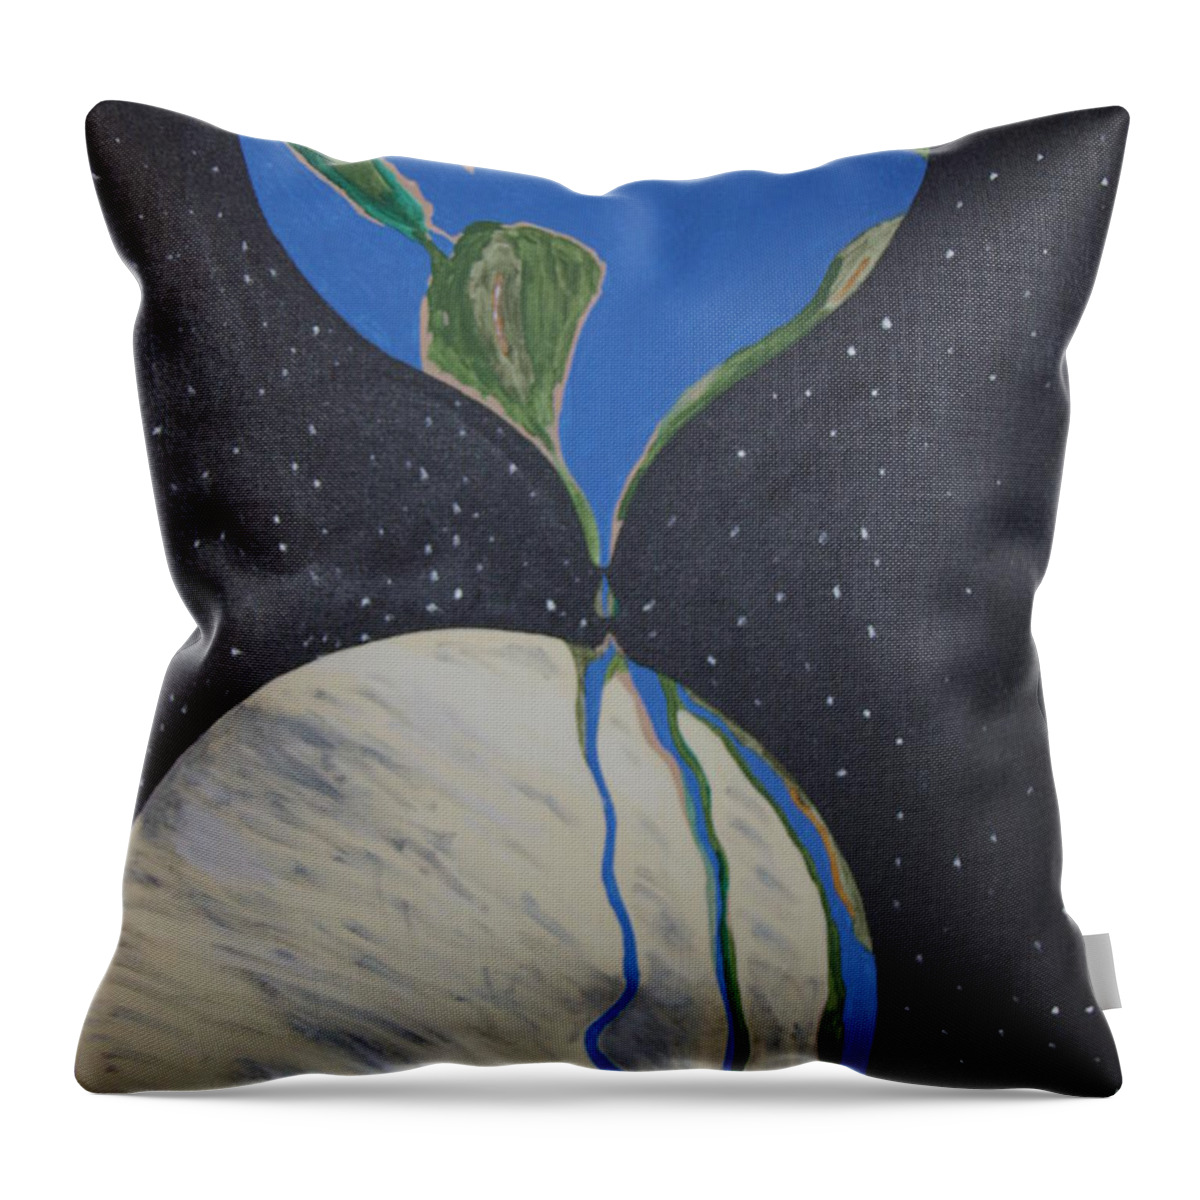 Enviromental Throw Pillow featuring the painting Global warming by Dean Stephens